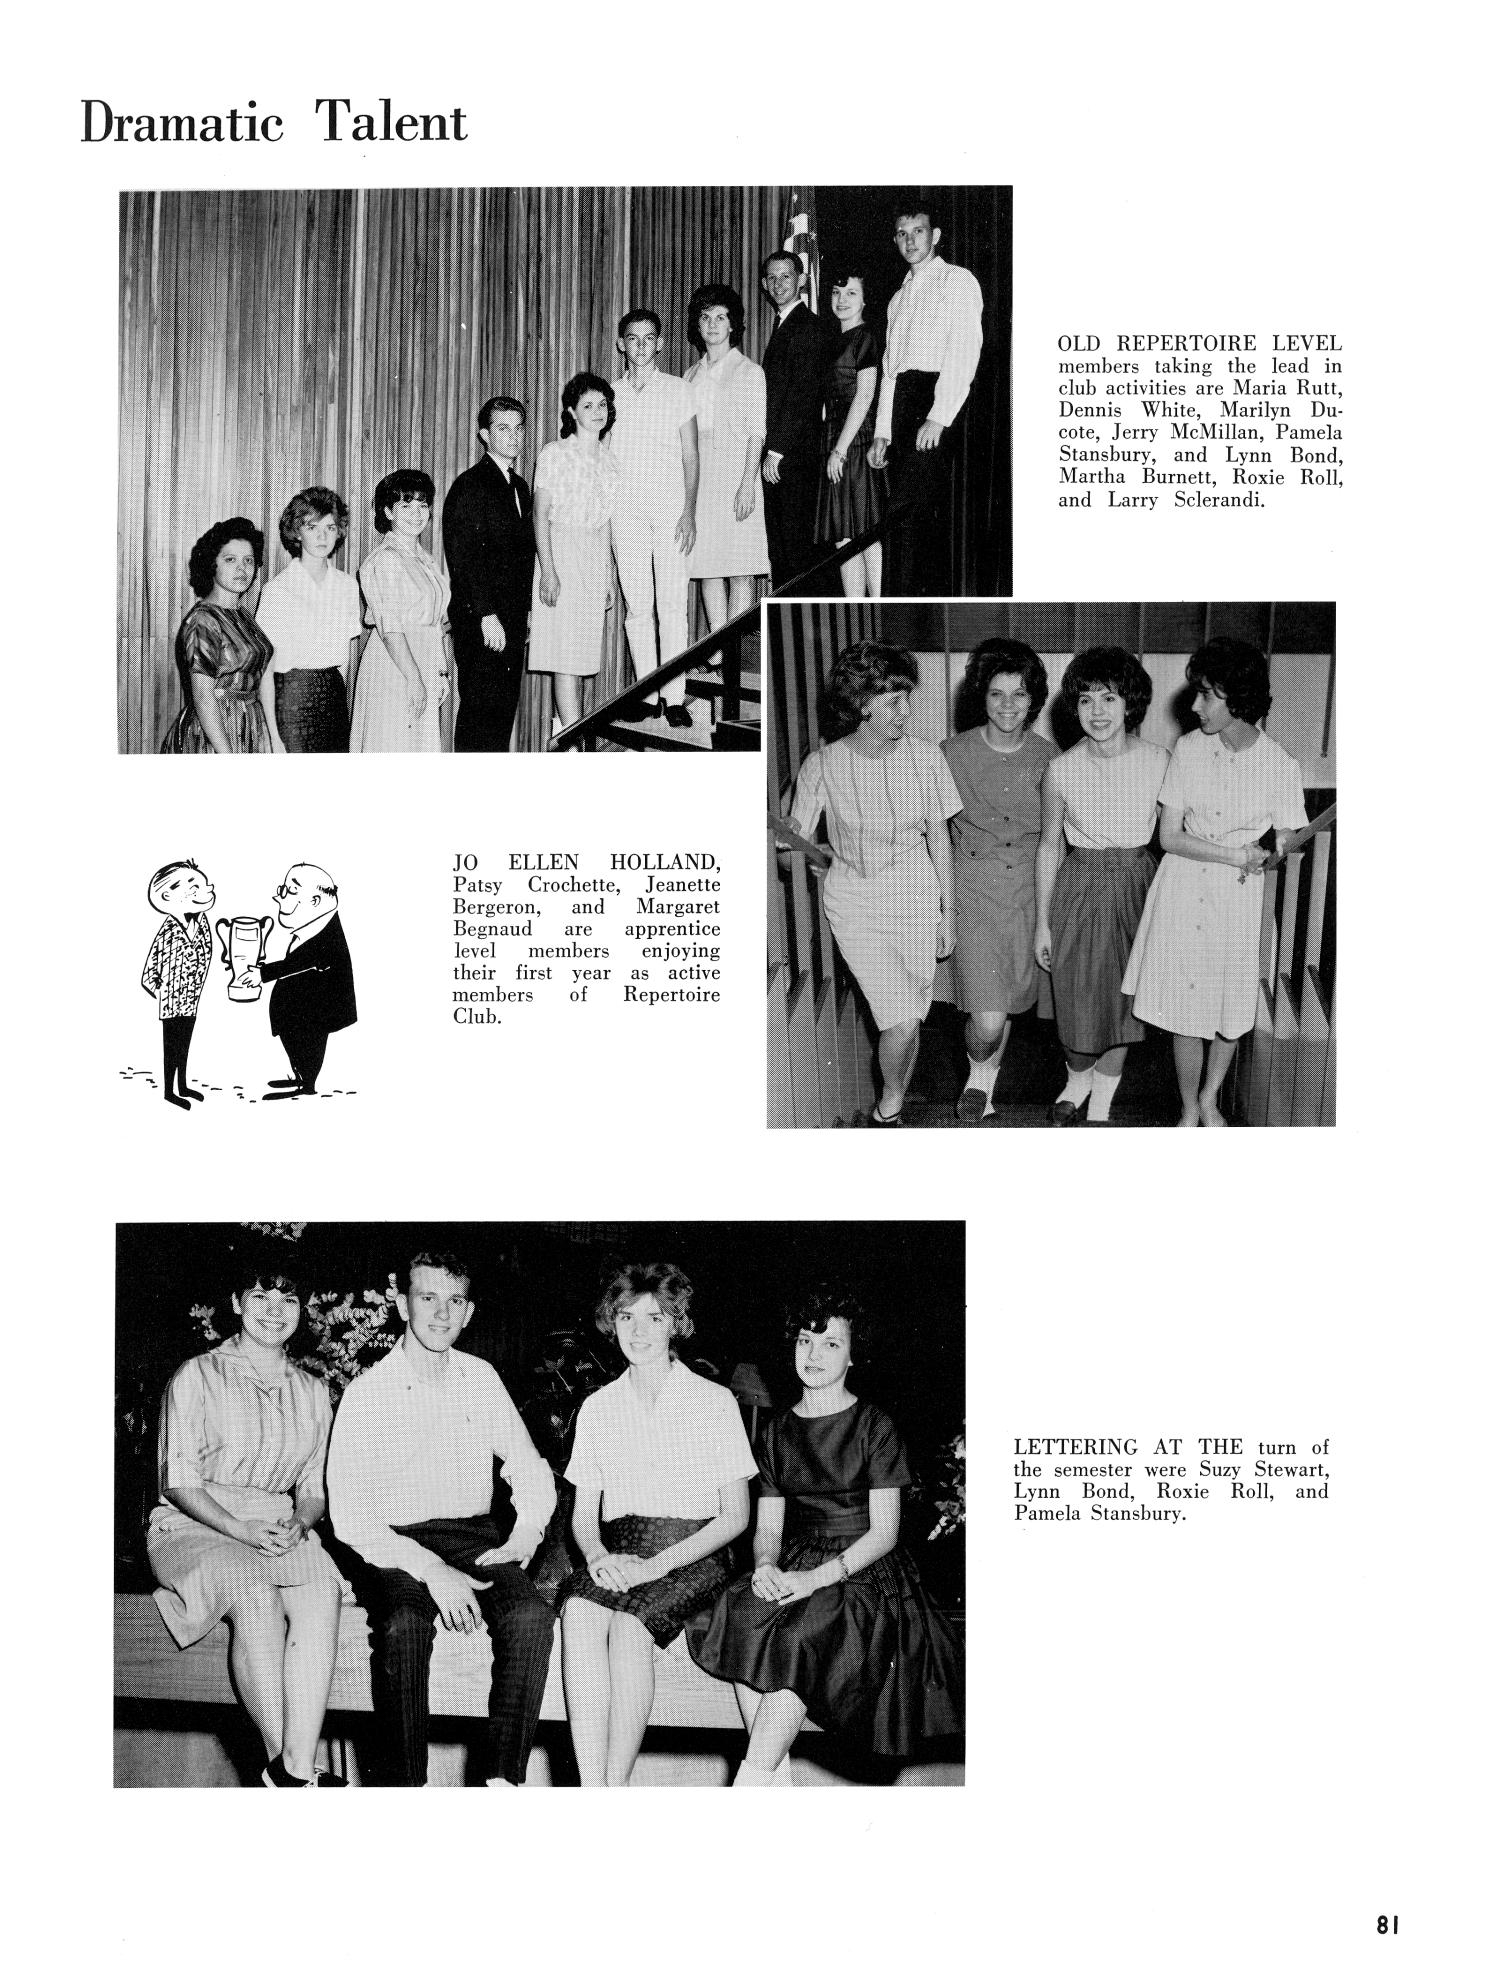 The Yellow Jacket, Yearbook of Thomas Jefferson High School, 1963
                                                
                                                    81
                                                